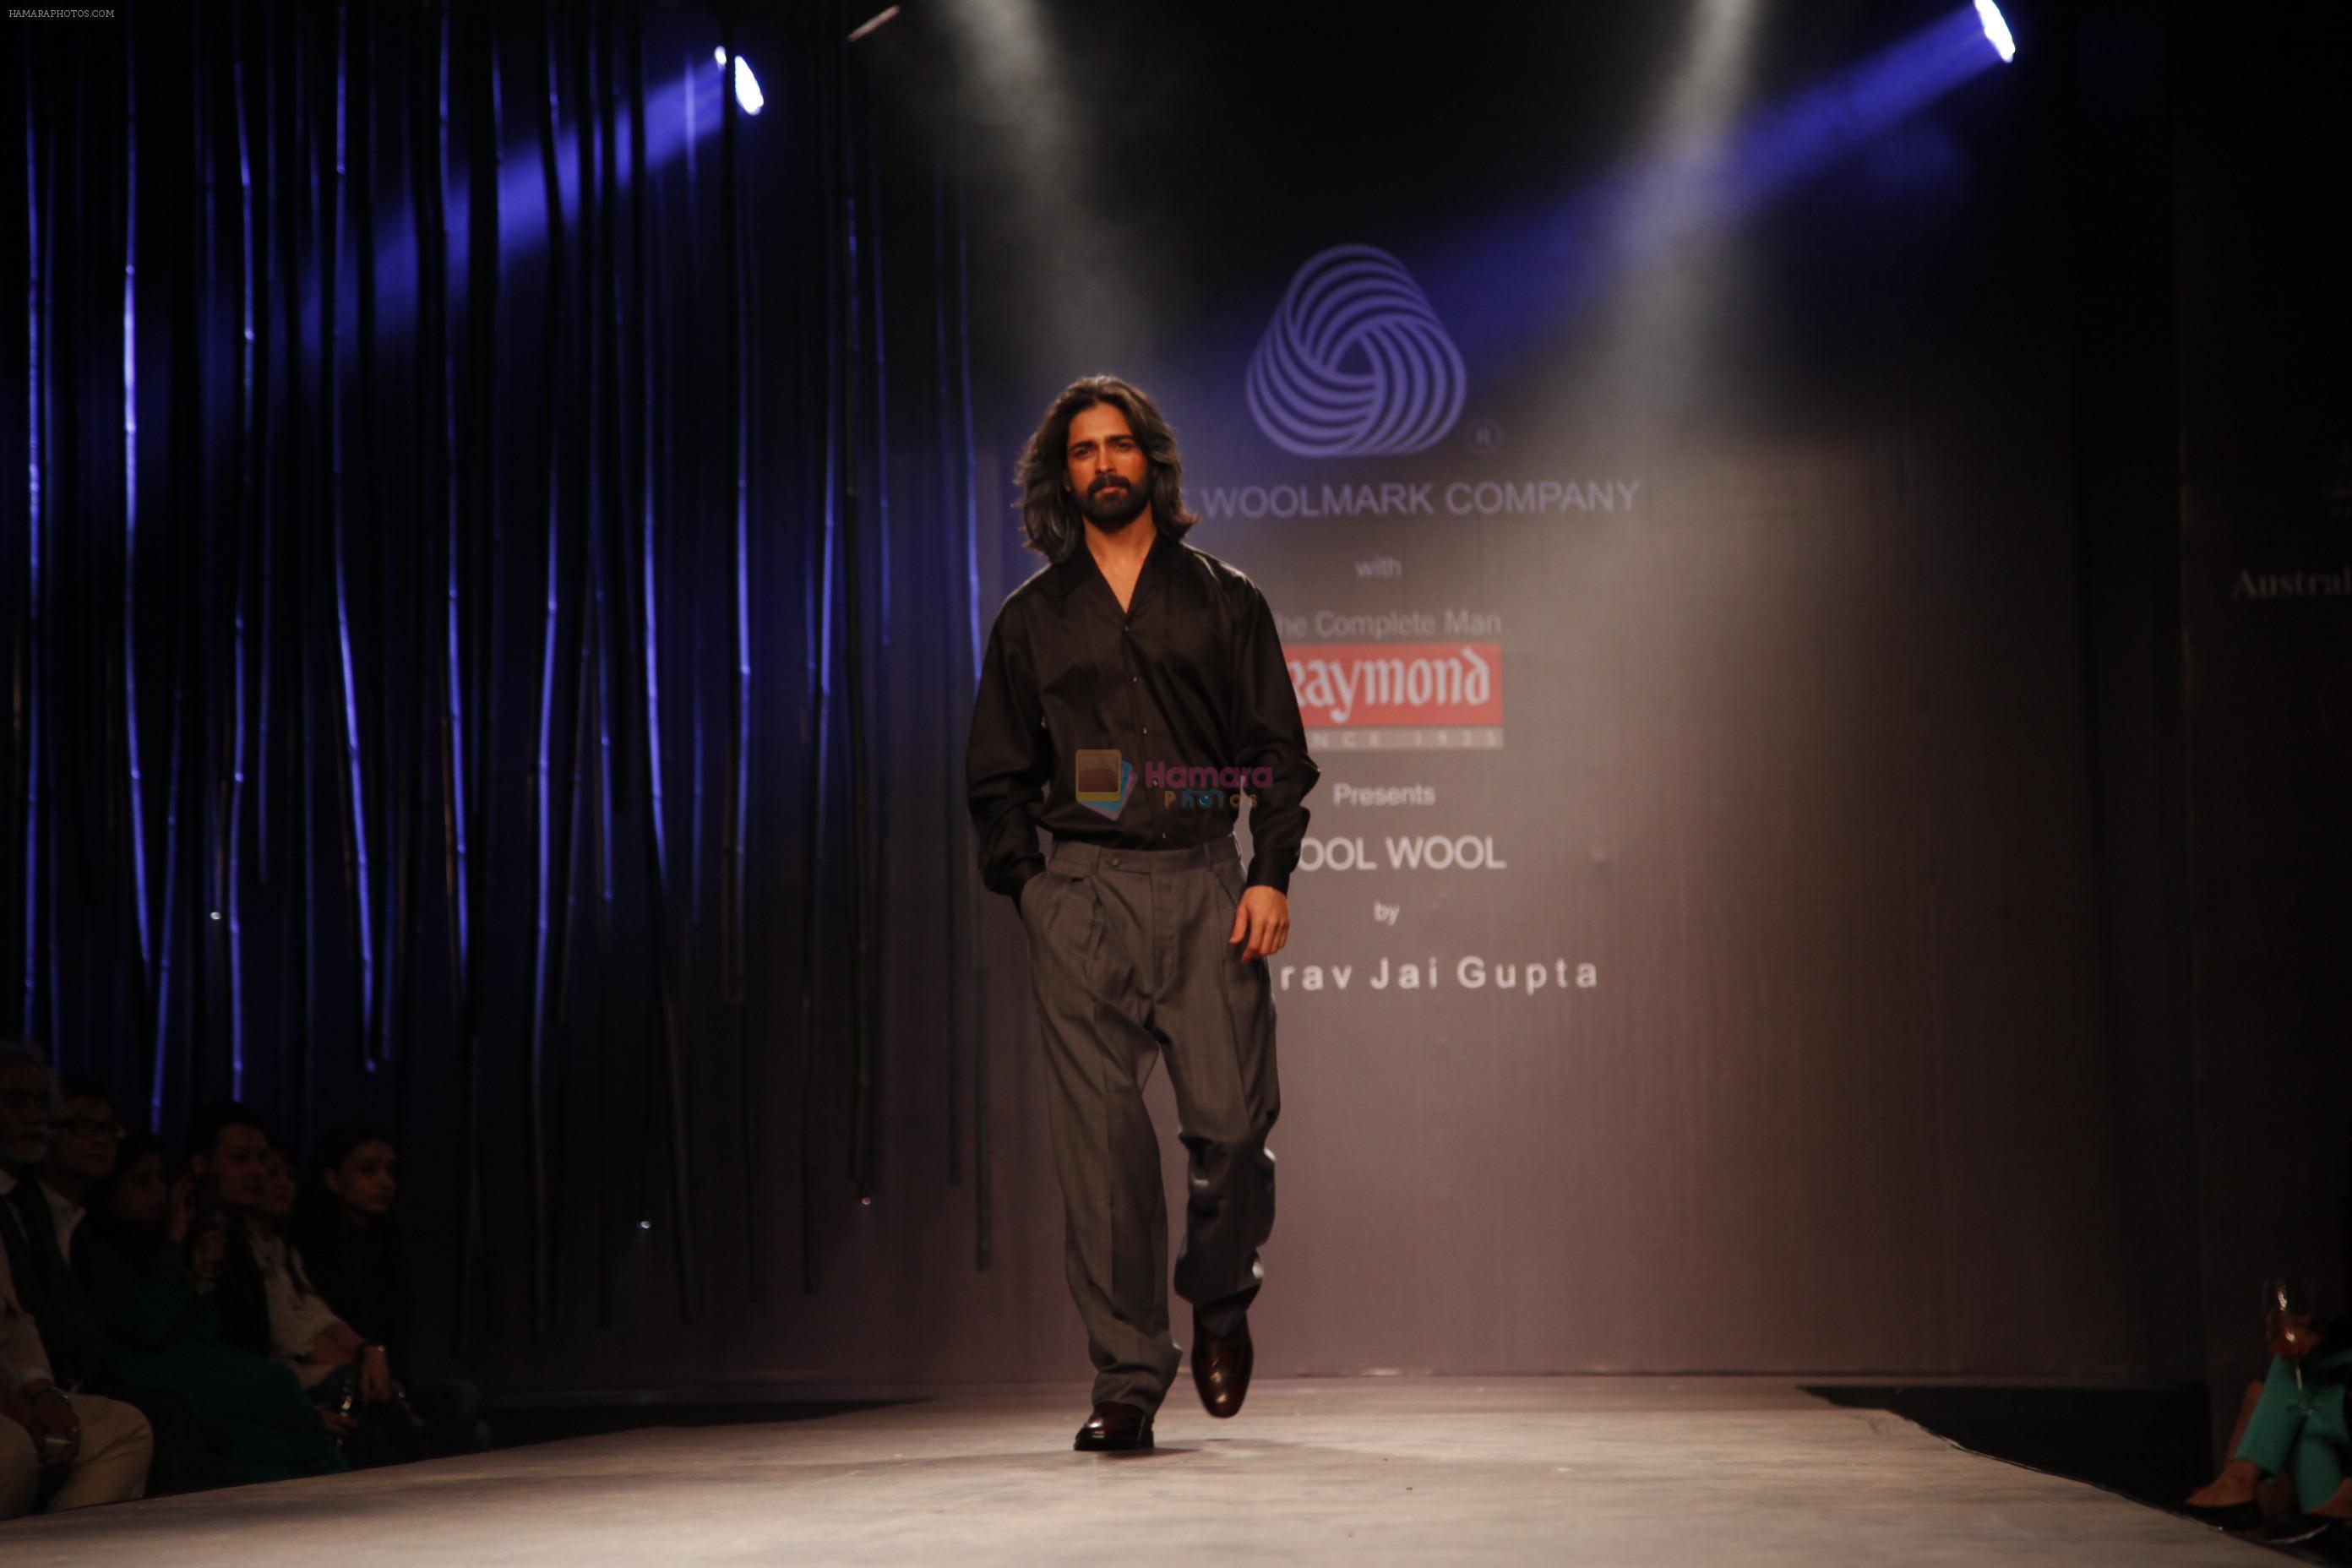 Model walks for Cool Wool show in Delhi on 6th March 2014